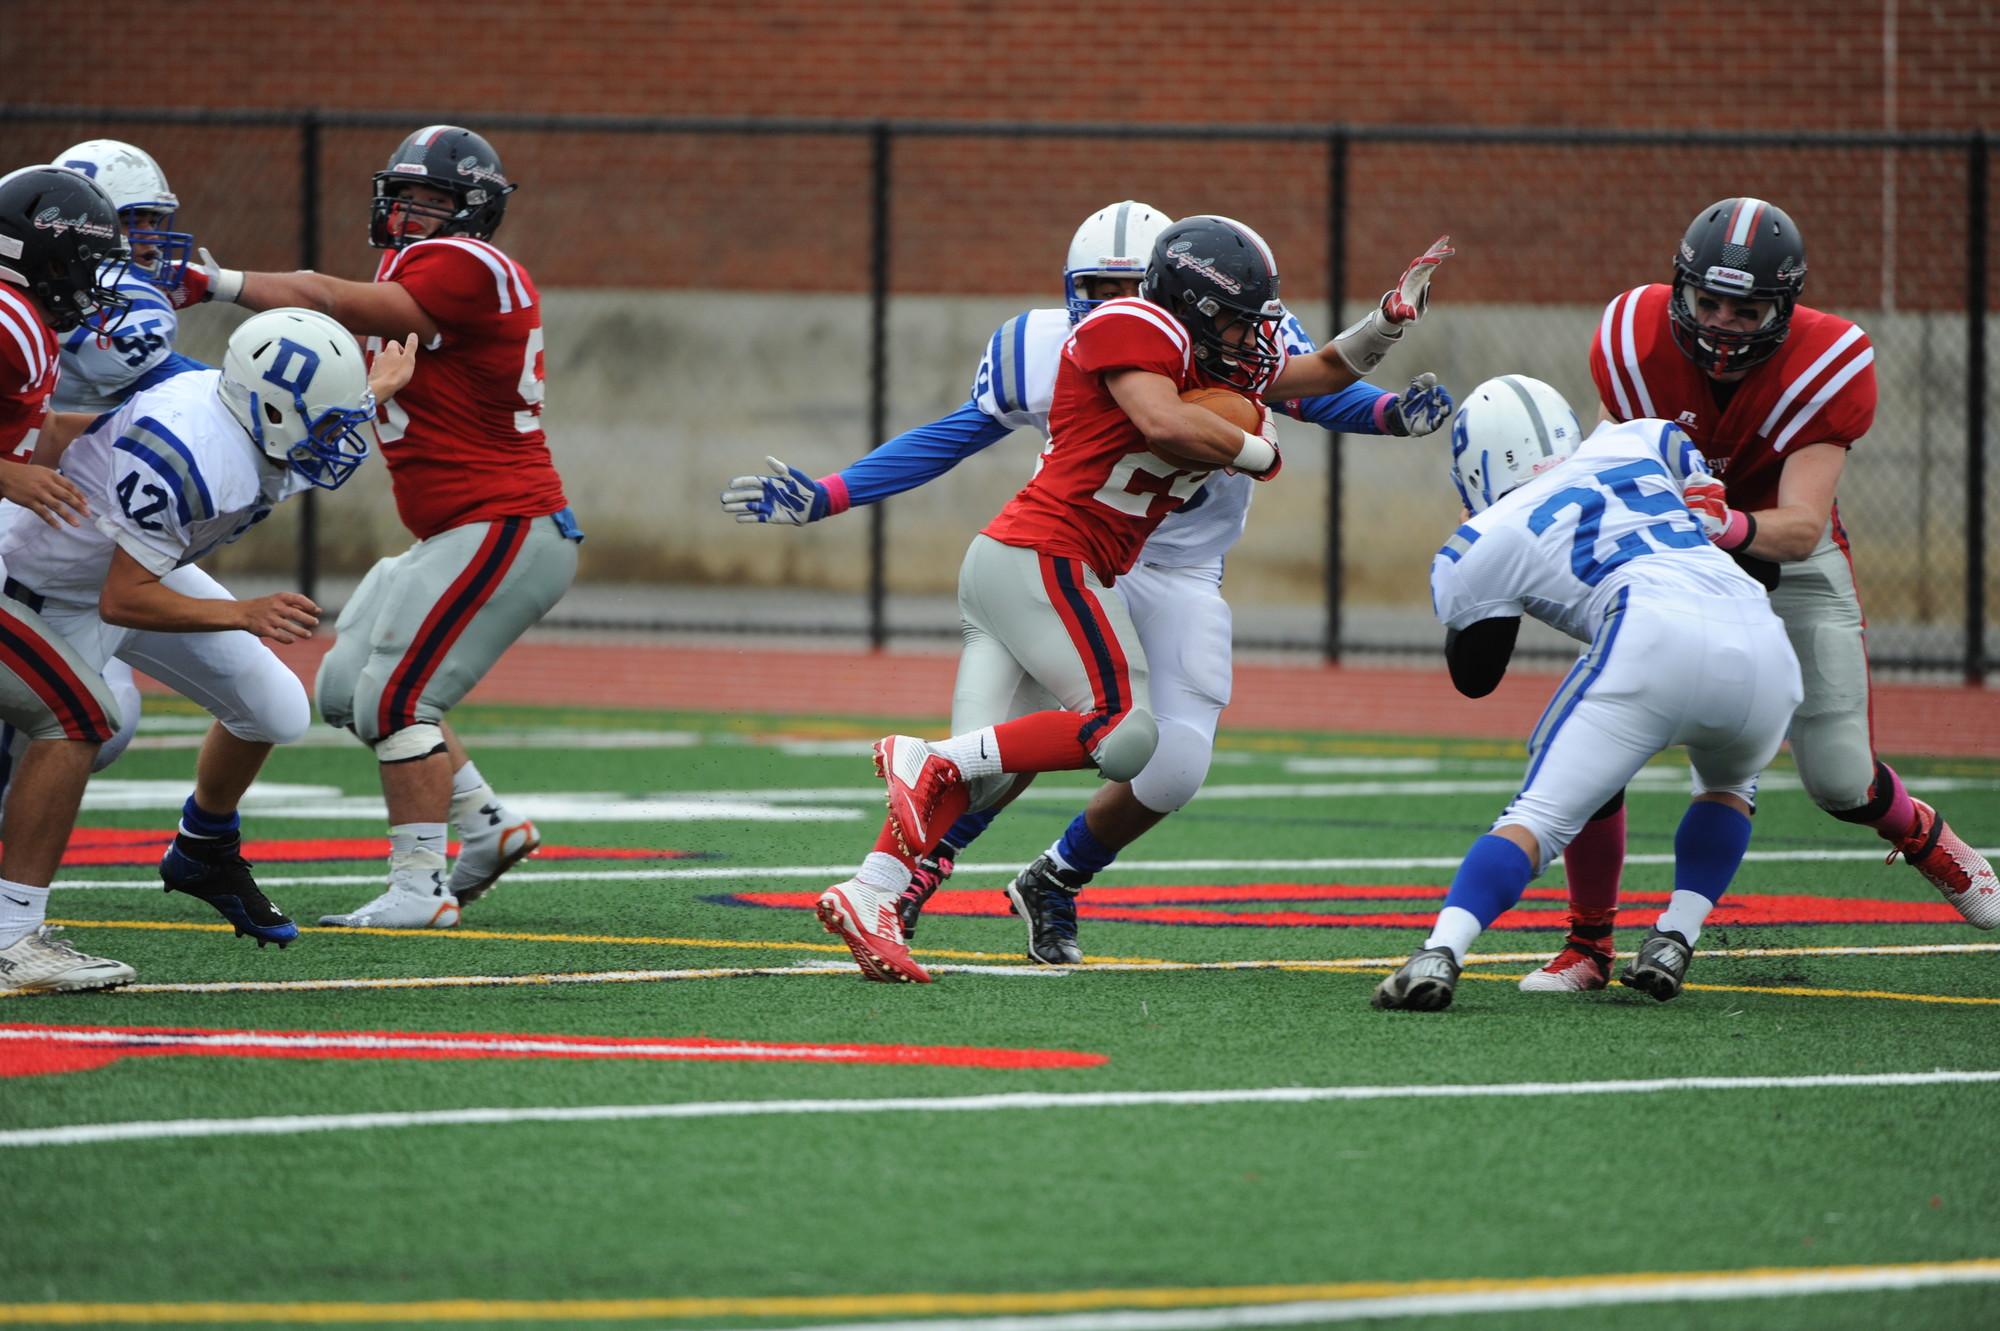 Luke Scaduto tried to break through Division’s defense to score a touchdown for South Side.